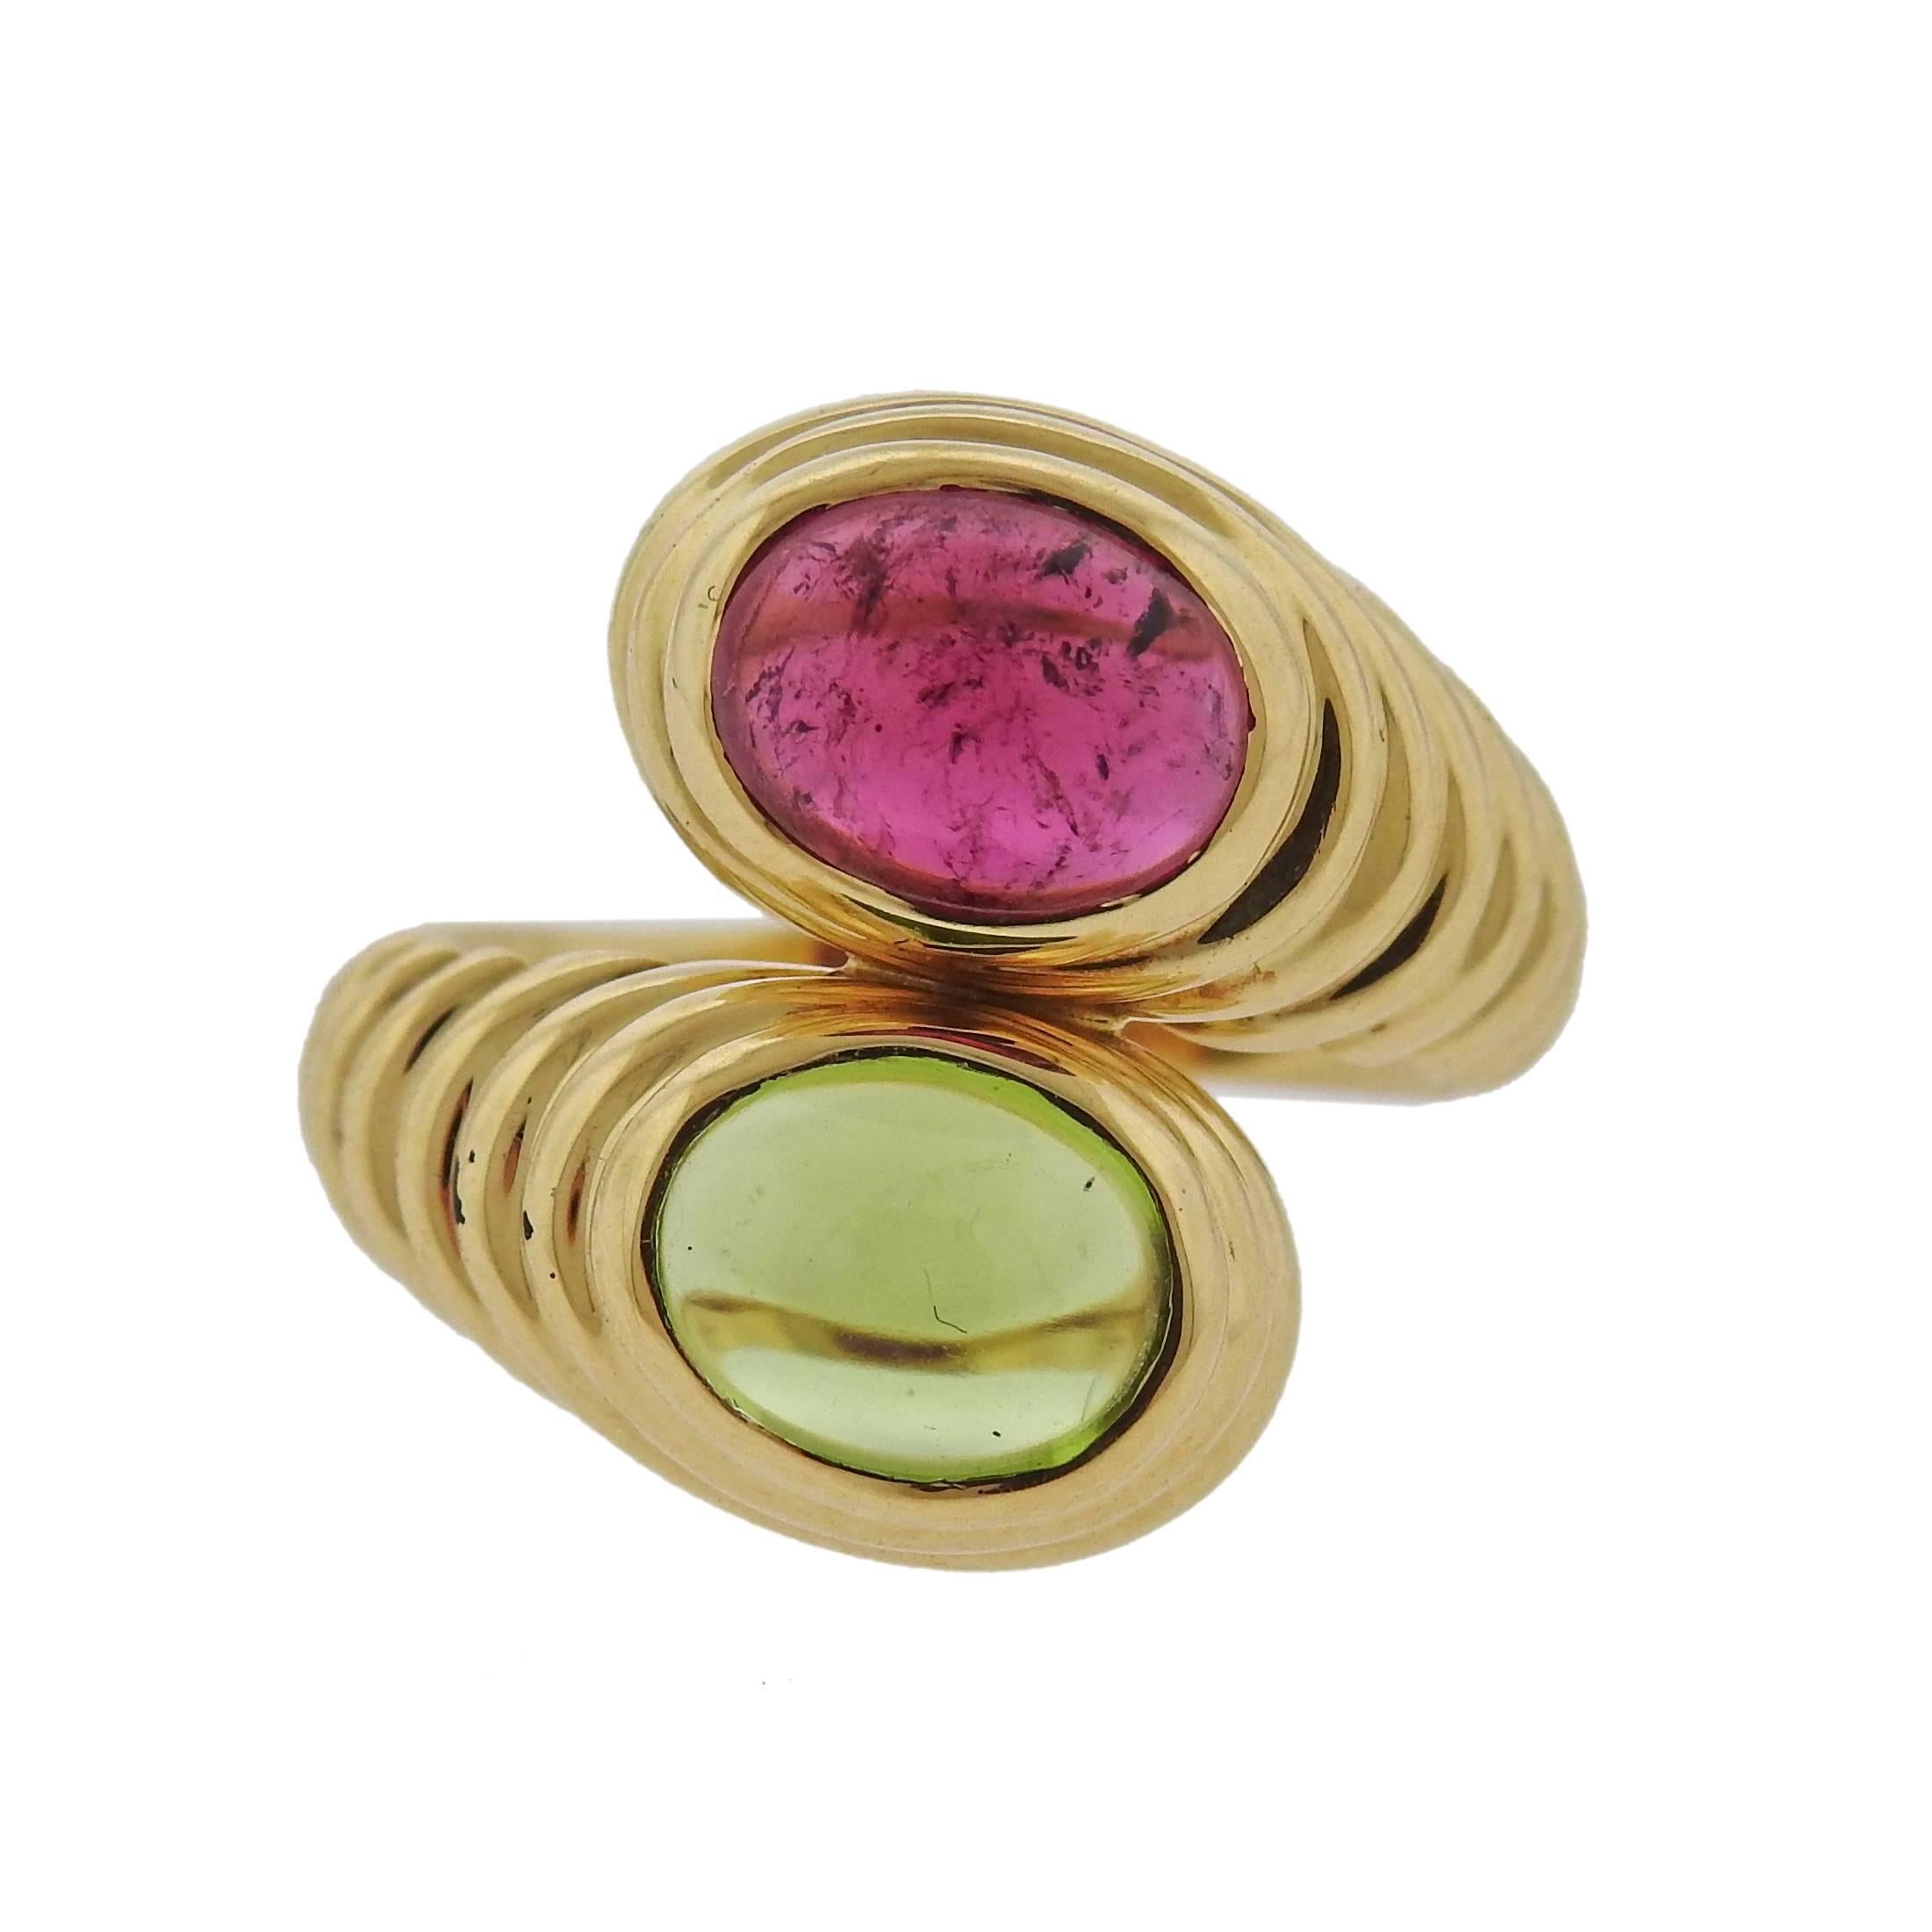 An 18k yellow gold bypass ring, crafted by Bulgari, set with pink tourmaline and peridot cabochons. Ring size 6, ring top is 20mm wide , ring weigs 13 grams. Marked: Bvlgari, 750, Italian mark 